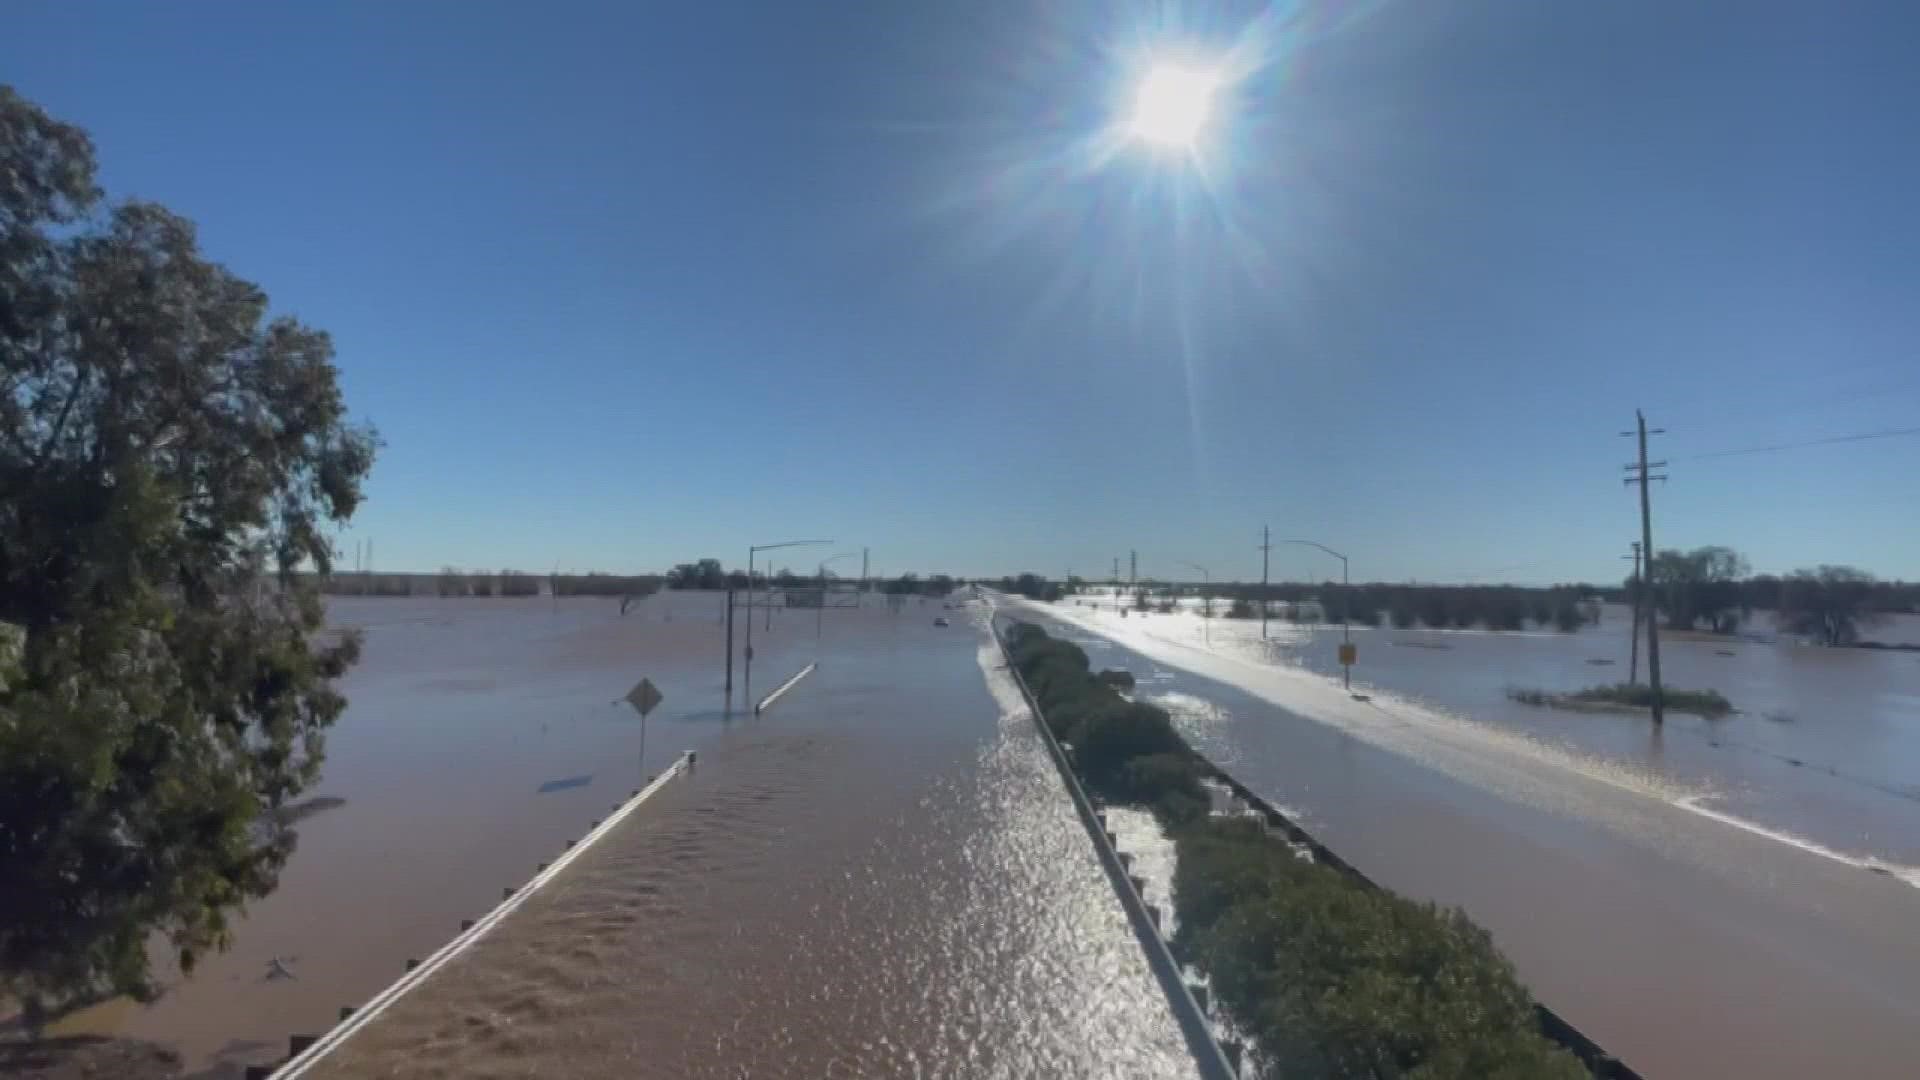 Part of Highway 99 in San Joaquin County was closed due to flooding. Caltrans said crews worked 12-hour shifts to get the roadway back open.